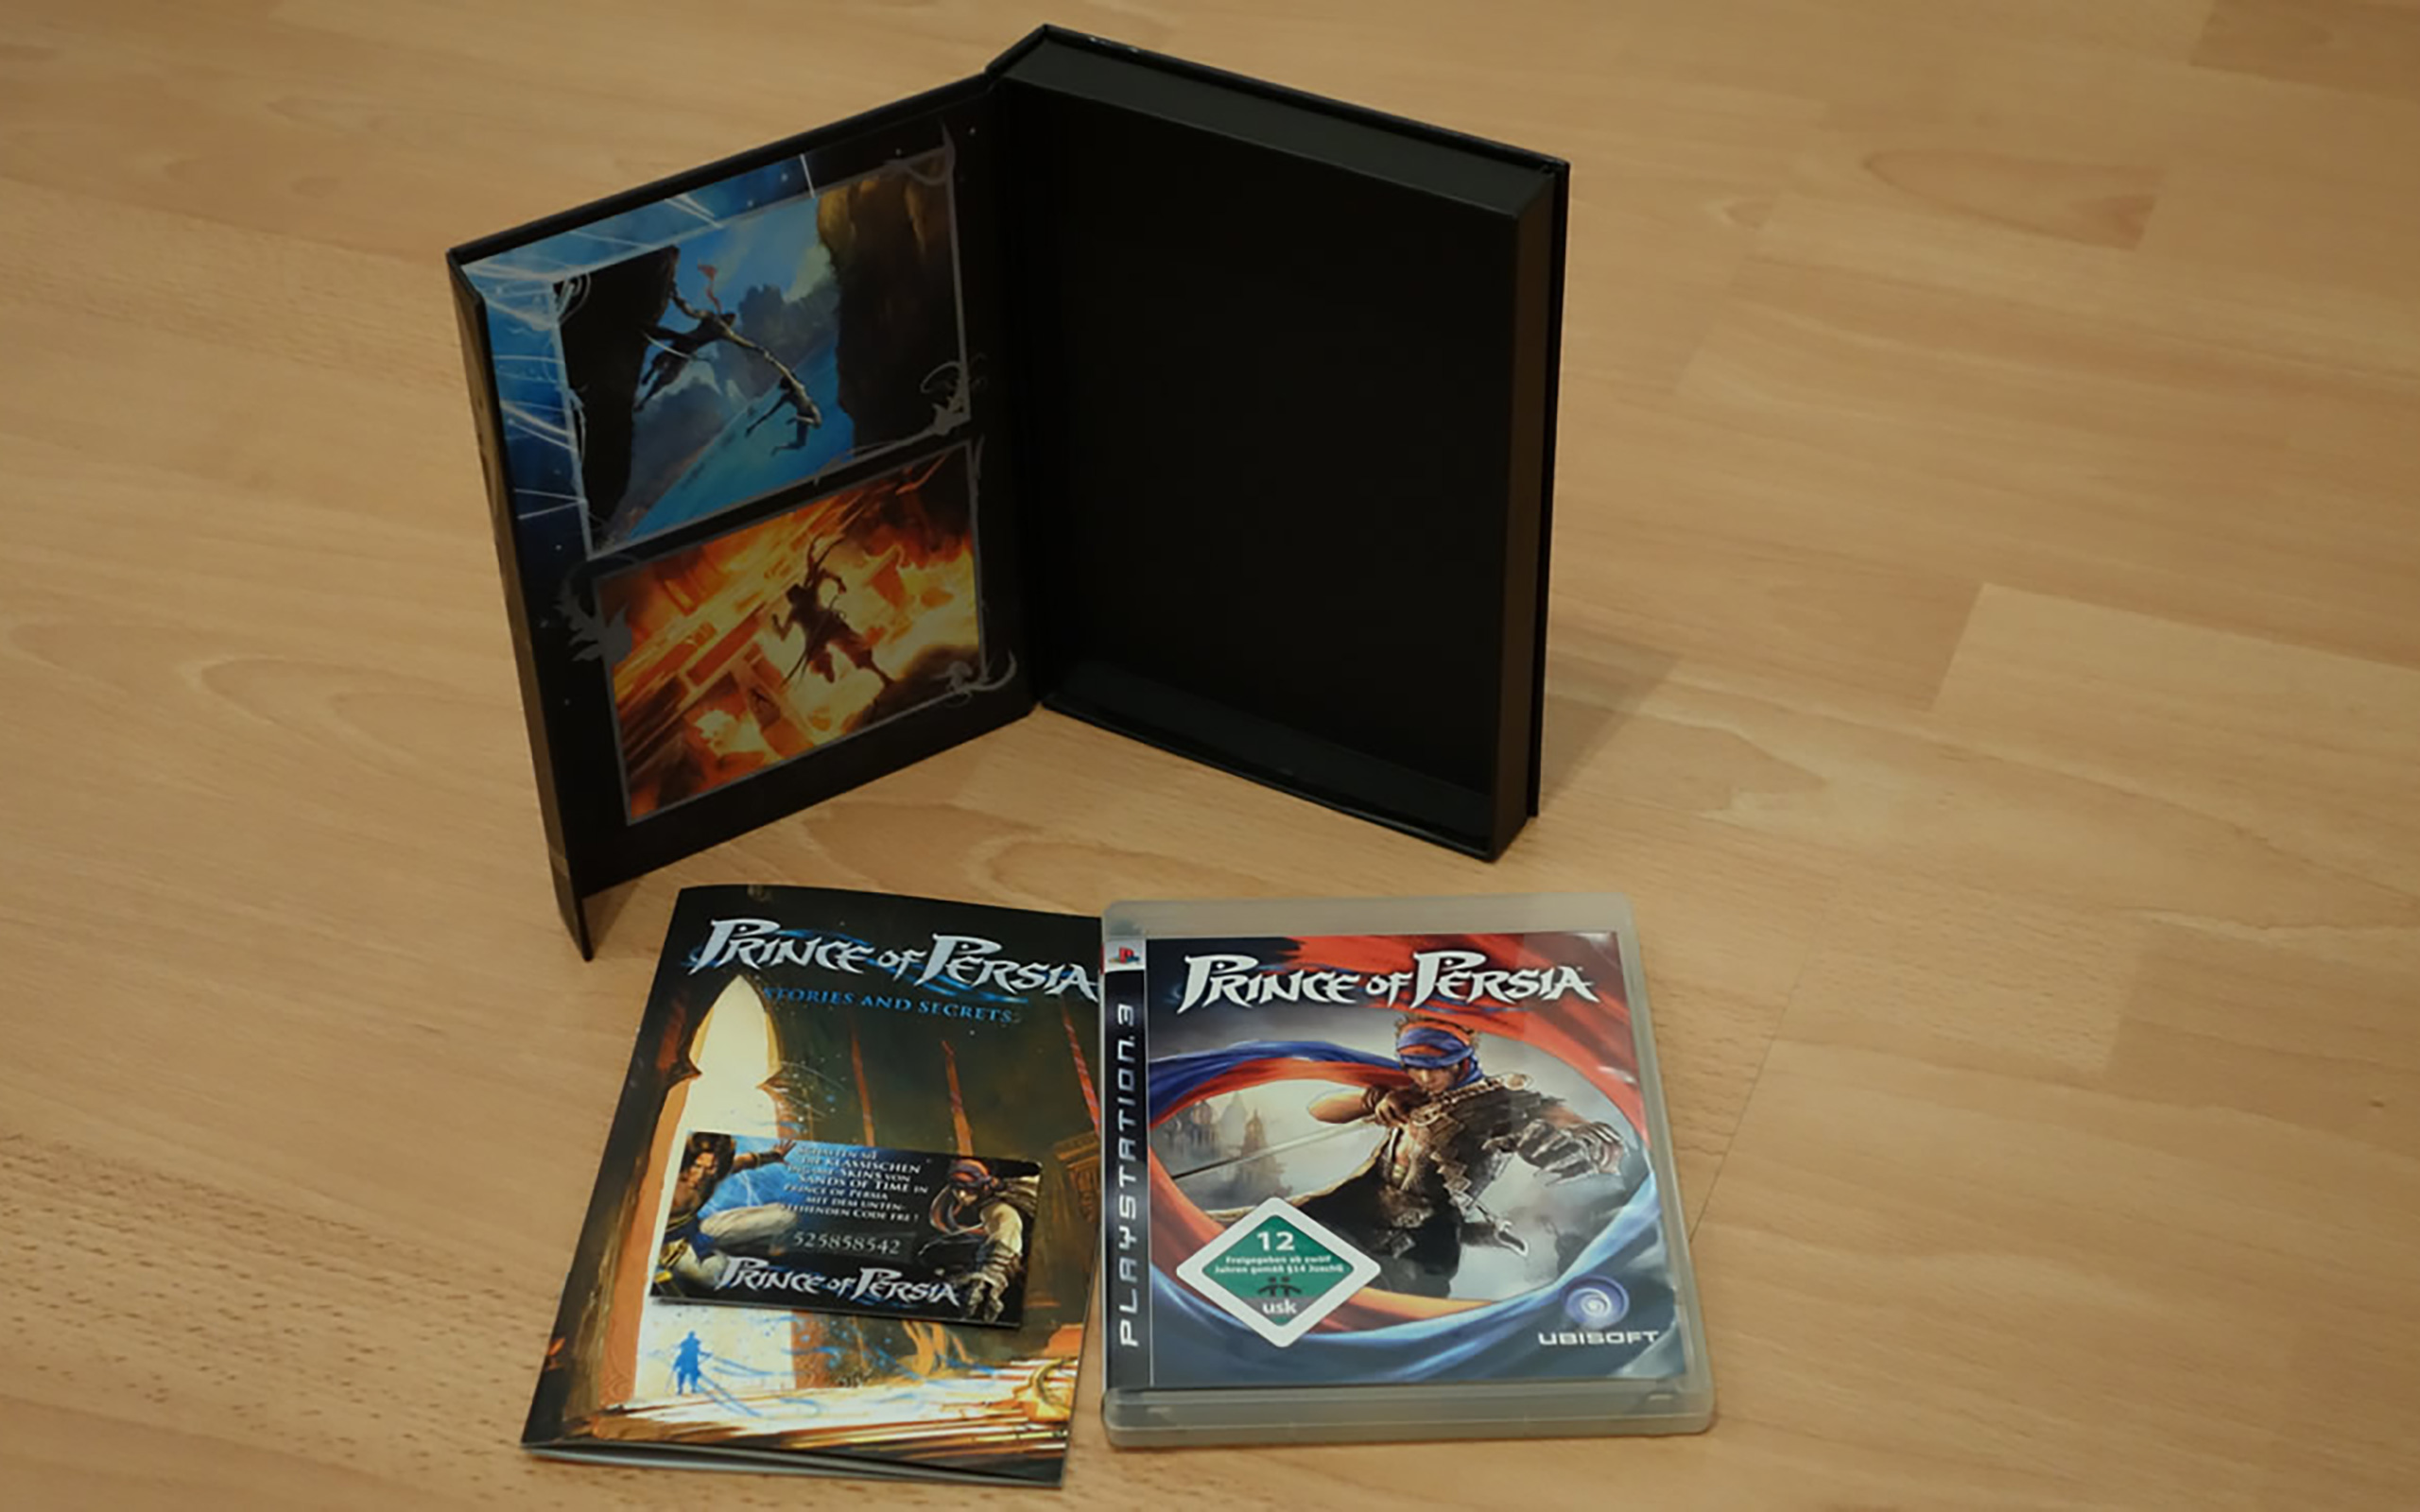 Prince of Persia 2008 Special Edition